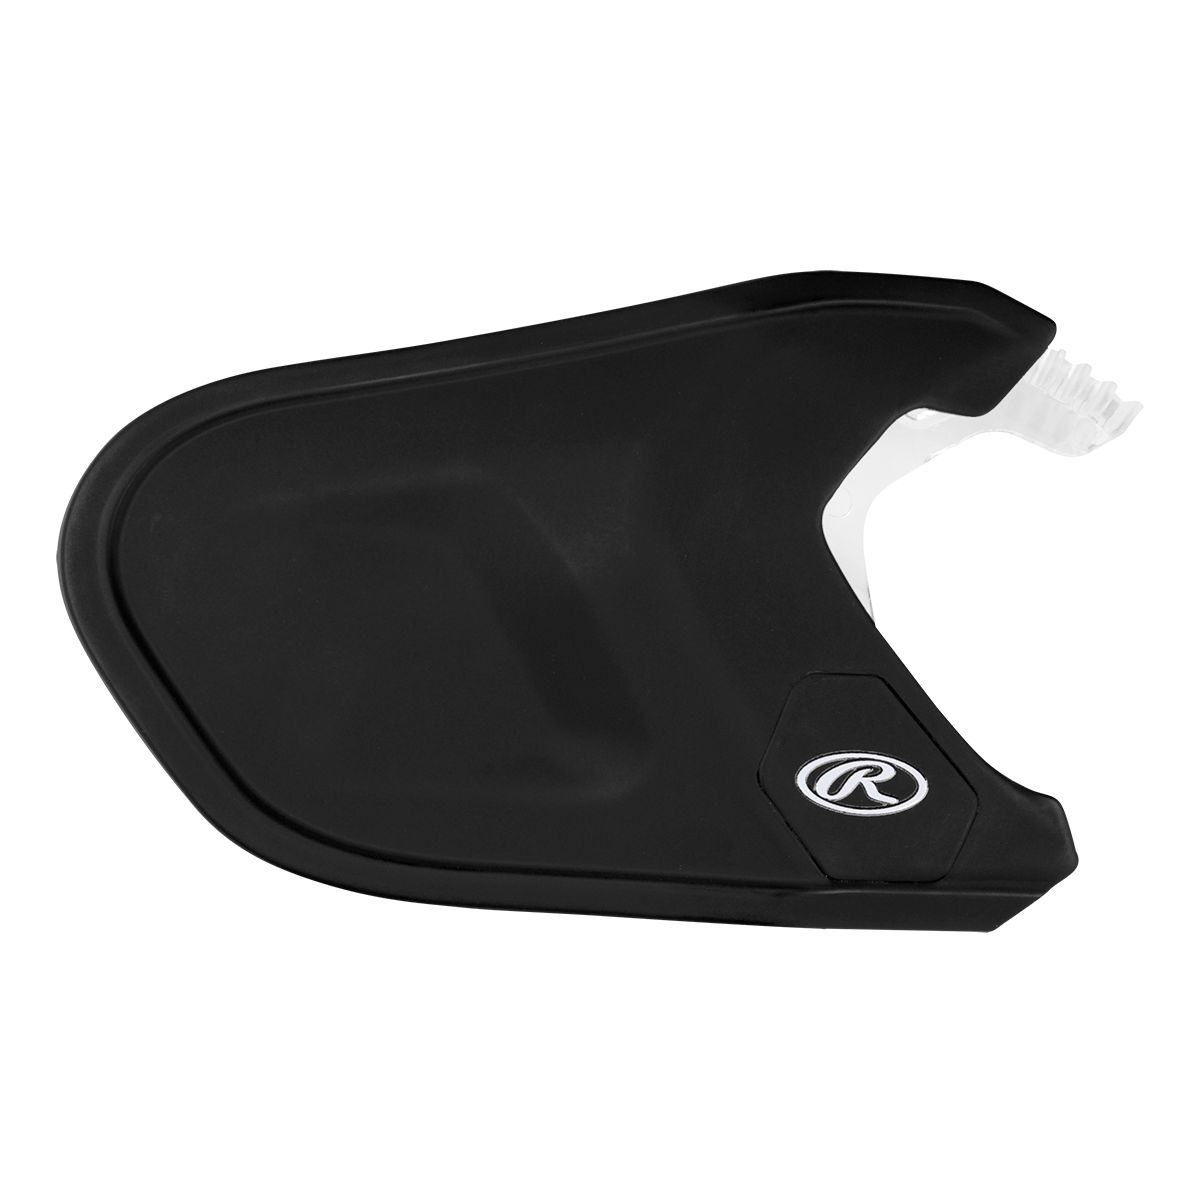 Image of Rawlings Mach Adjust Jaw Guard - Left Hand Batter